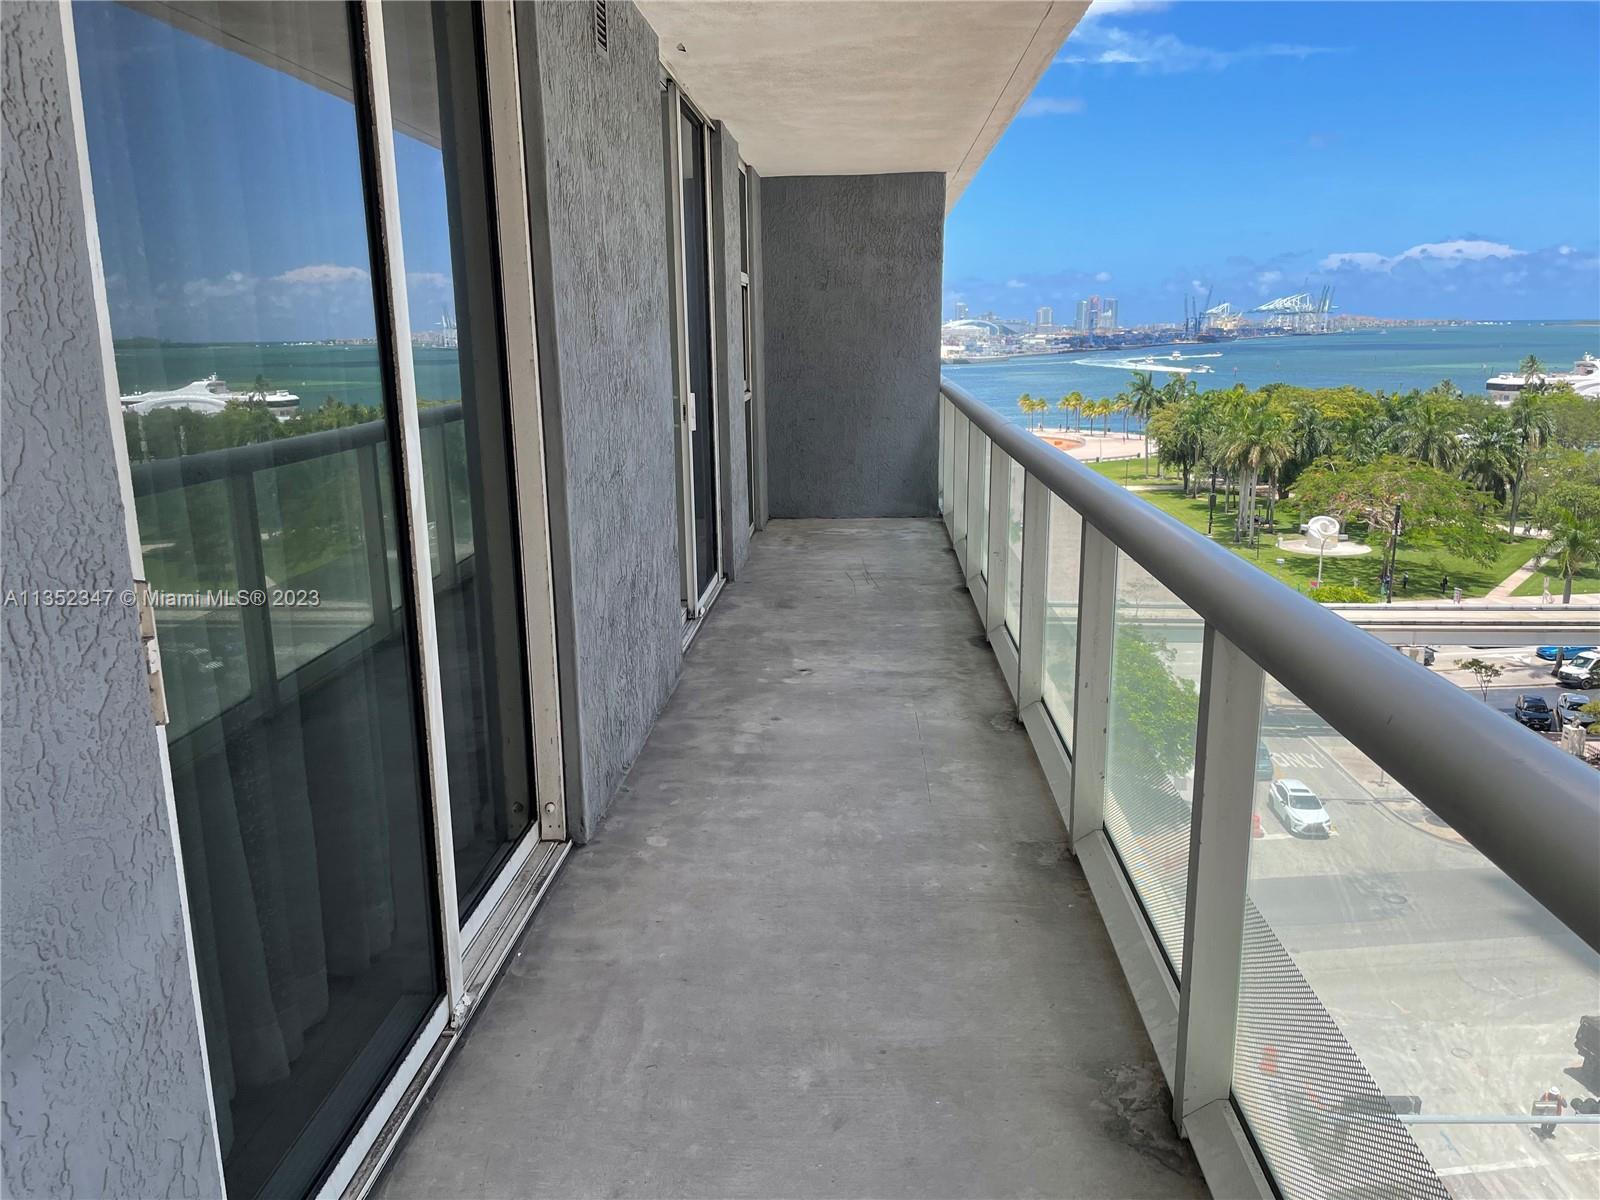 CLICK VIRTUAL TOUR LINK TO SEE VIDEO. Modern corporate style partially furnished bay view unit at 50 Biscayne, all tiled, Designer furniture by Rockwell Group, direct bayfront park bay view from balcony and very spacious closets, split floorplan, freshly painted. 50 Biscayne building is full of 5 star amenities including a state of the art gym w a view, resort style pool w cabanas, spa with steam room and sauna, party room, and more. Excellent central location right across Biscayne park near Bayside, American Airlines Arena, Whole Foods, Silverspot Cinema, people mover stop, govn't station, Brightline Station, & Brickell City Centre. Rent includes 1 parking, water, cable, internet. Short term possible with higher rent.*Yellow sofa & chairs in living room pix are no longer included in unit*